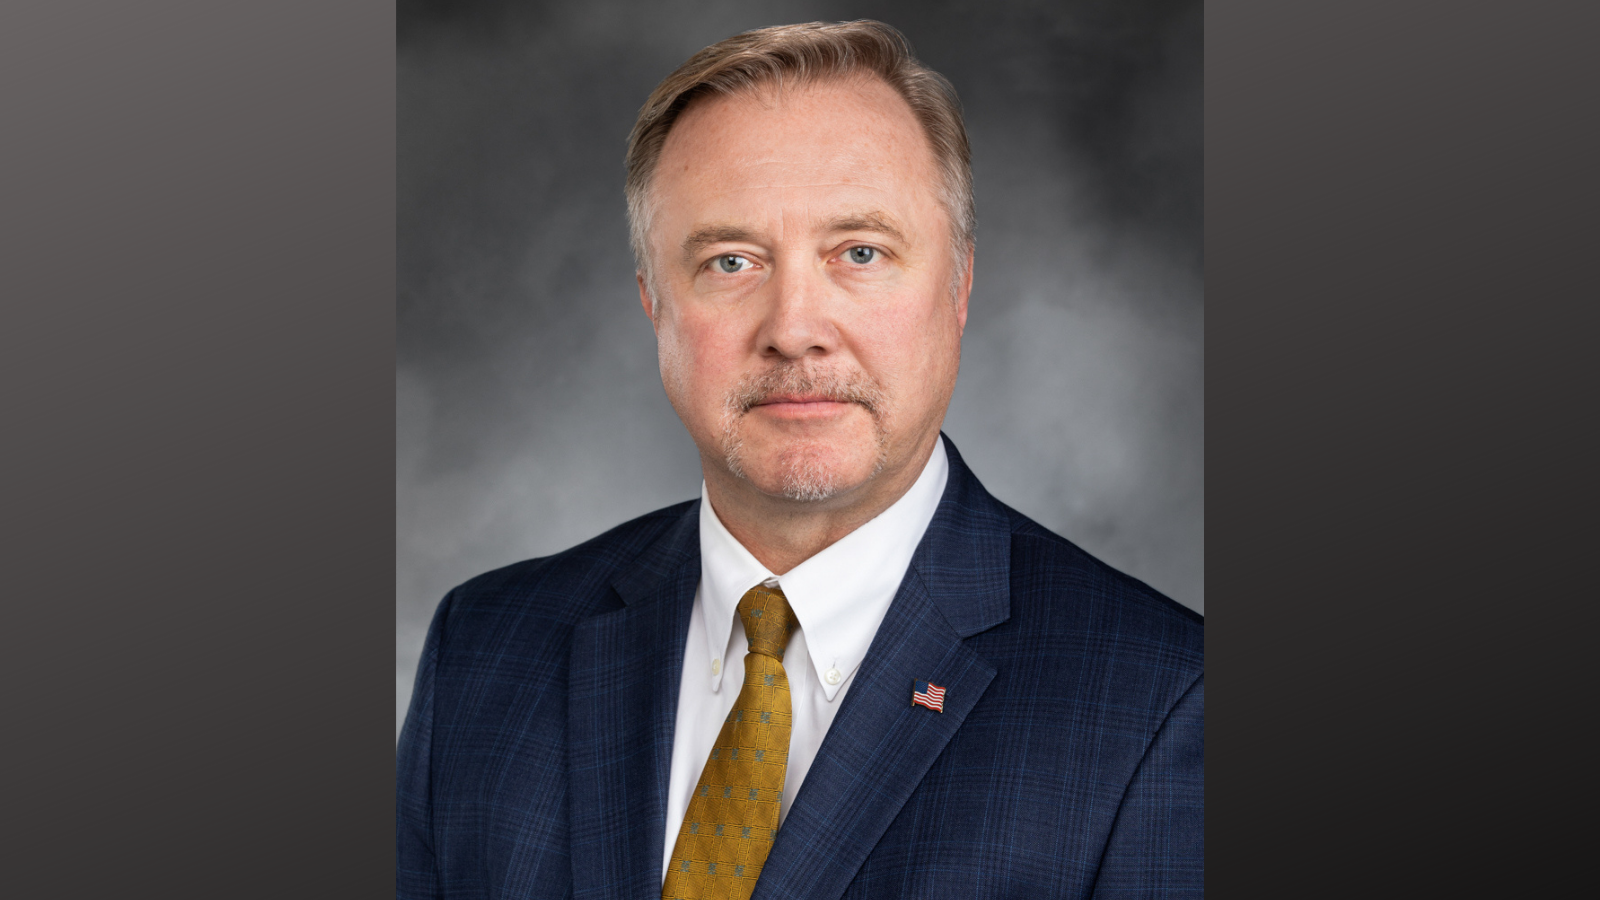 AUDIO: Ericksen: Inslee is only governor to fire unvaccinated workers – other states breathe free